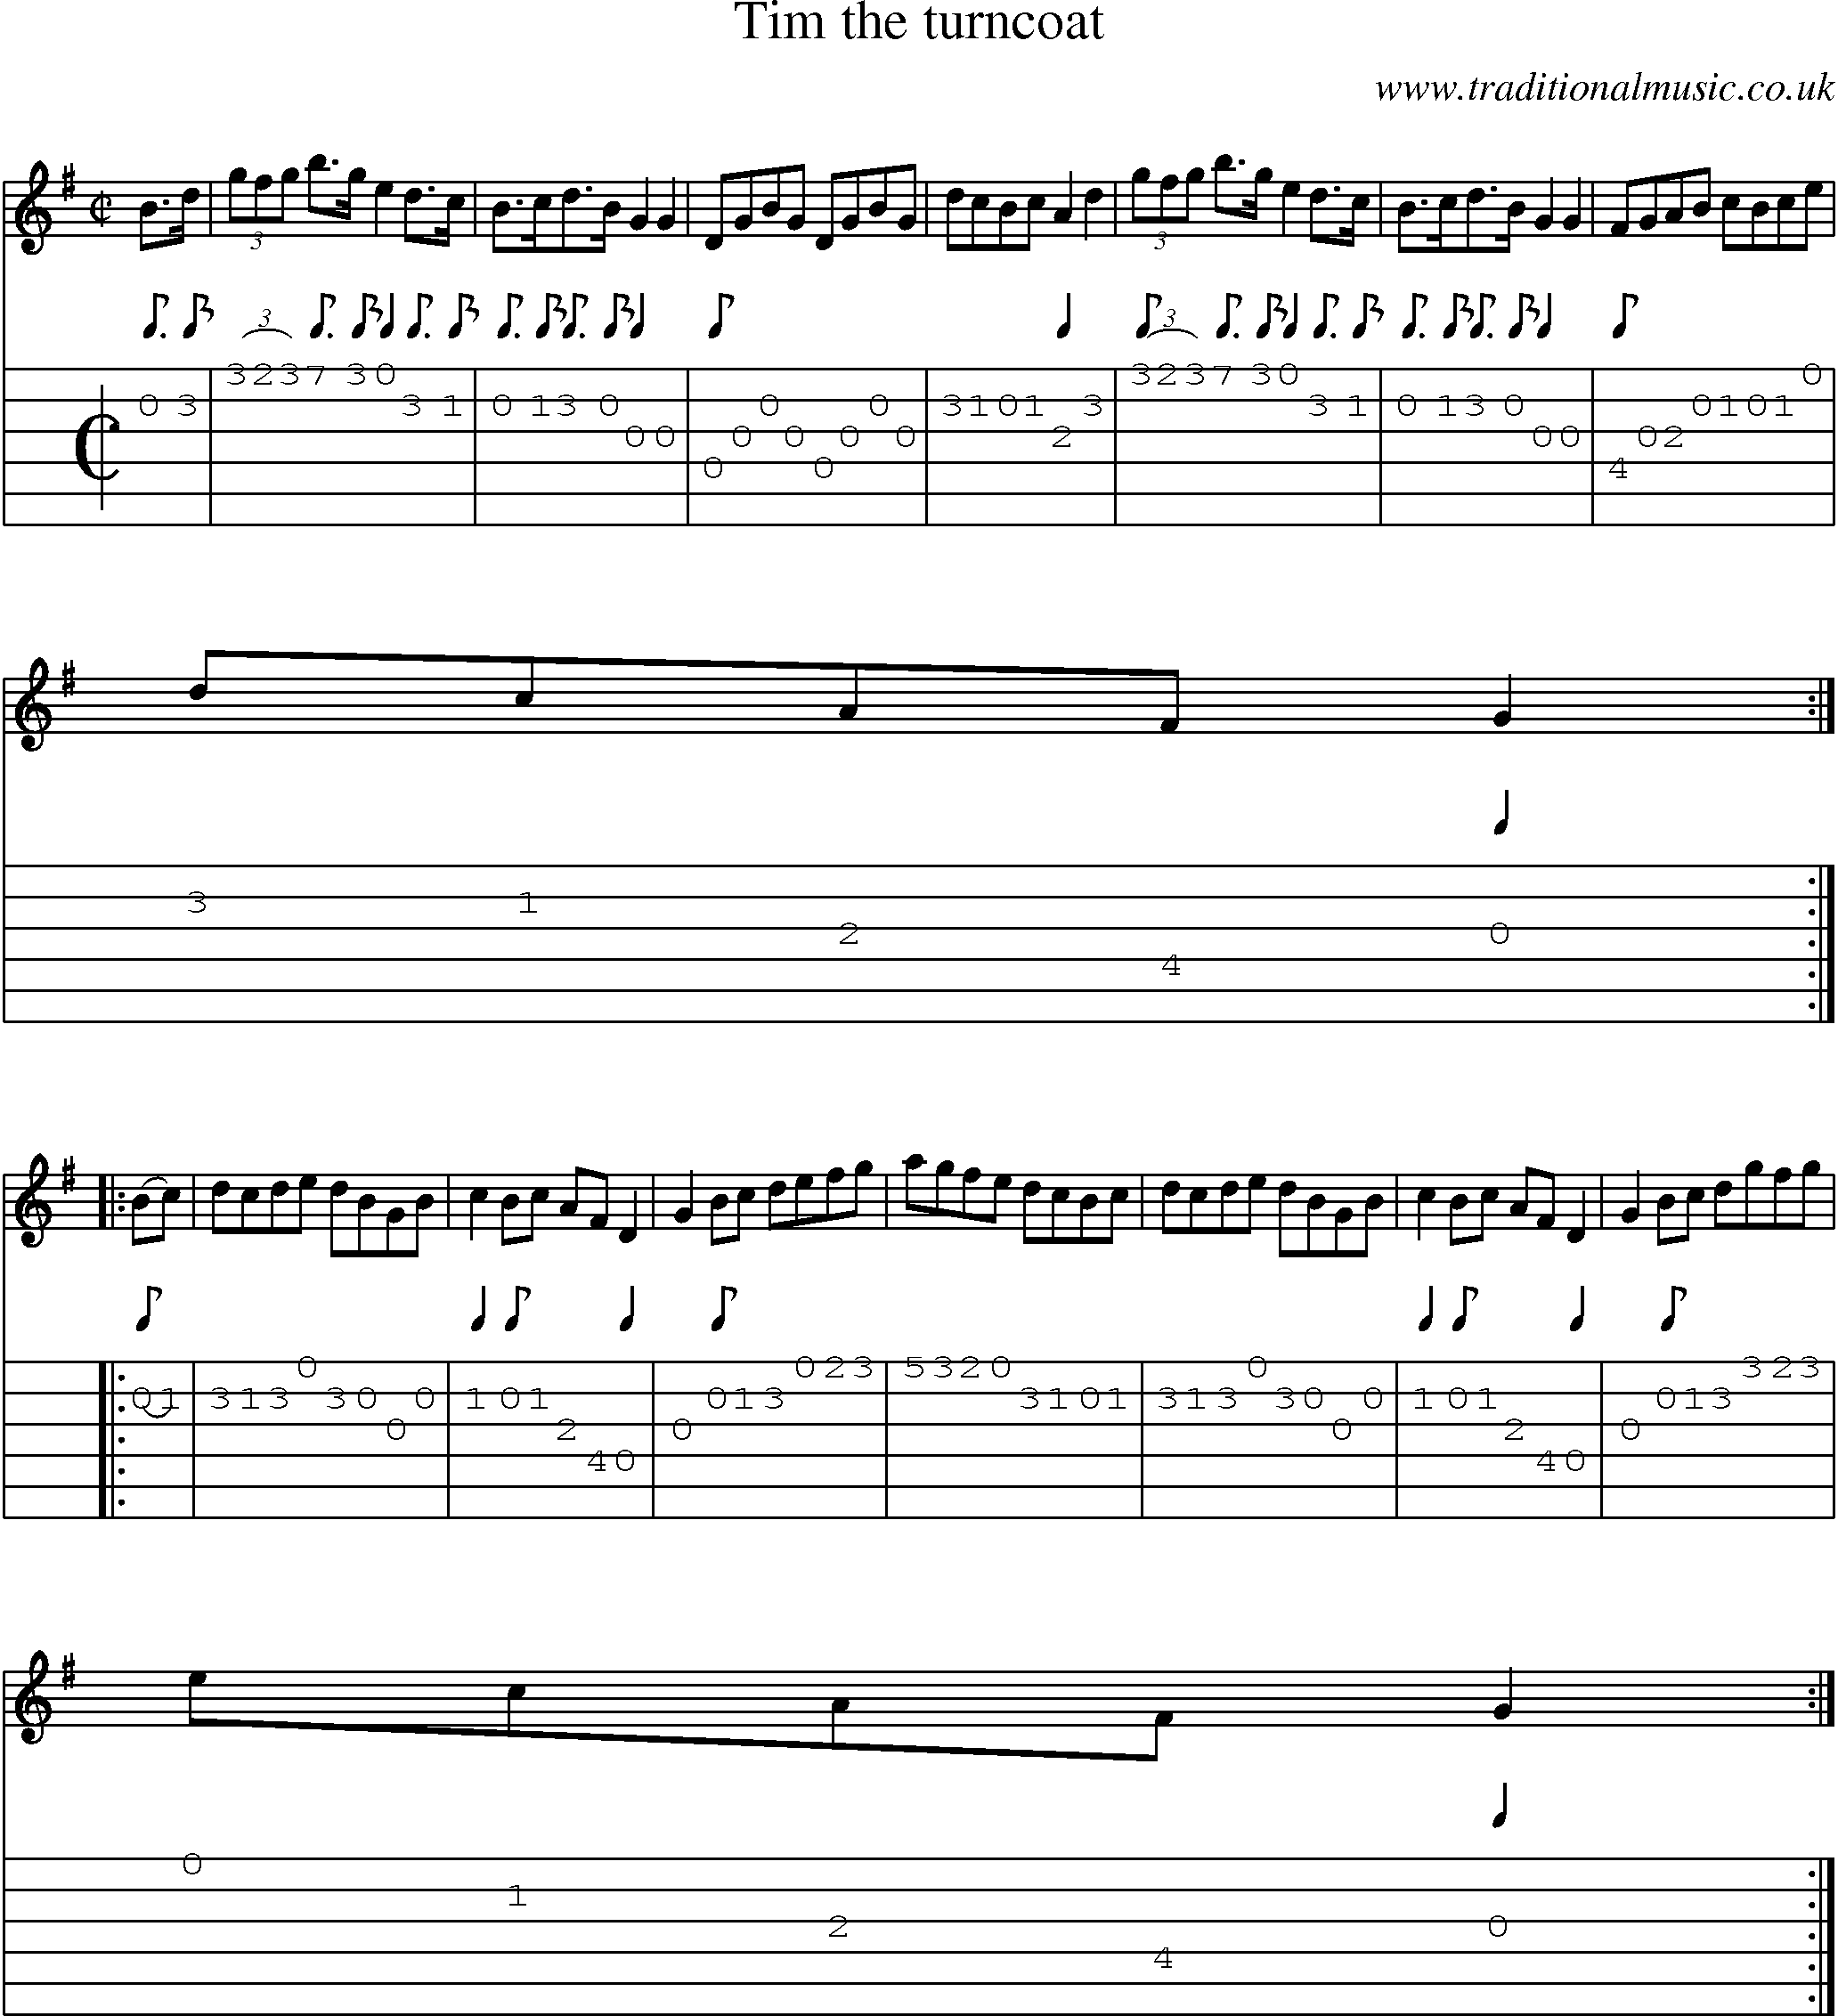 Music Score and Guitar Tabs for Tim The Turncoat